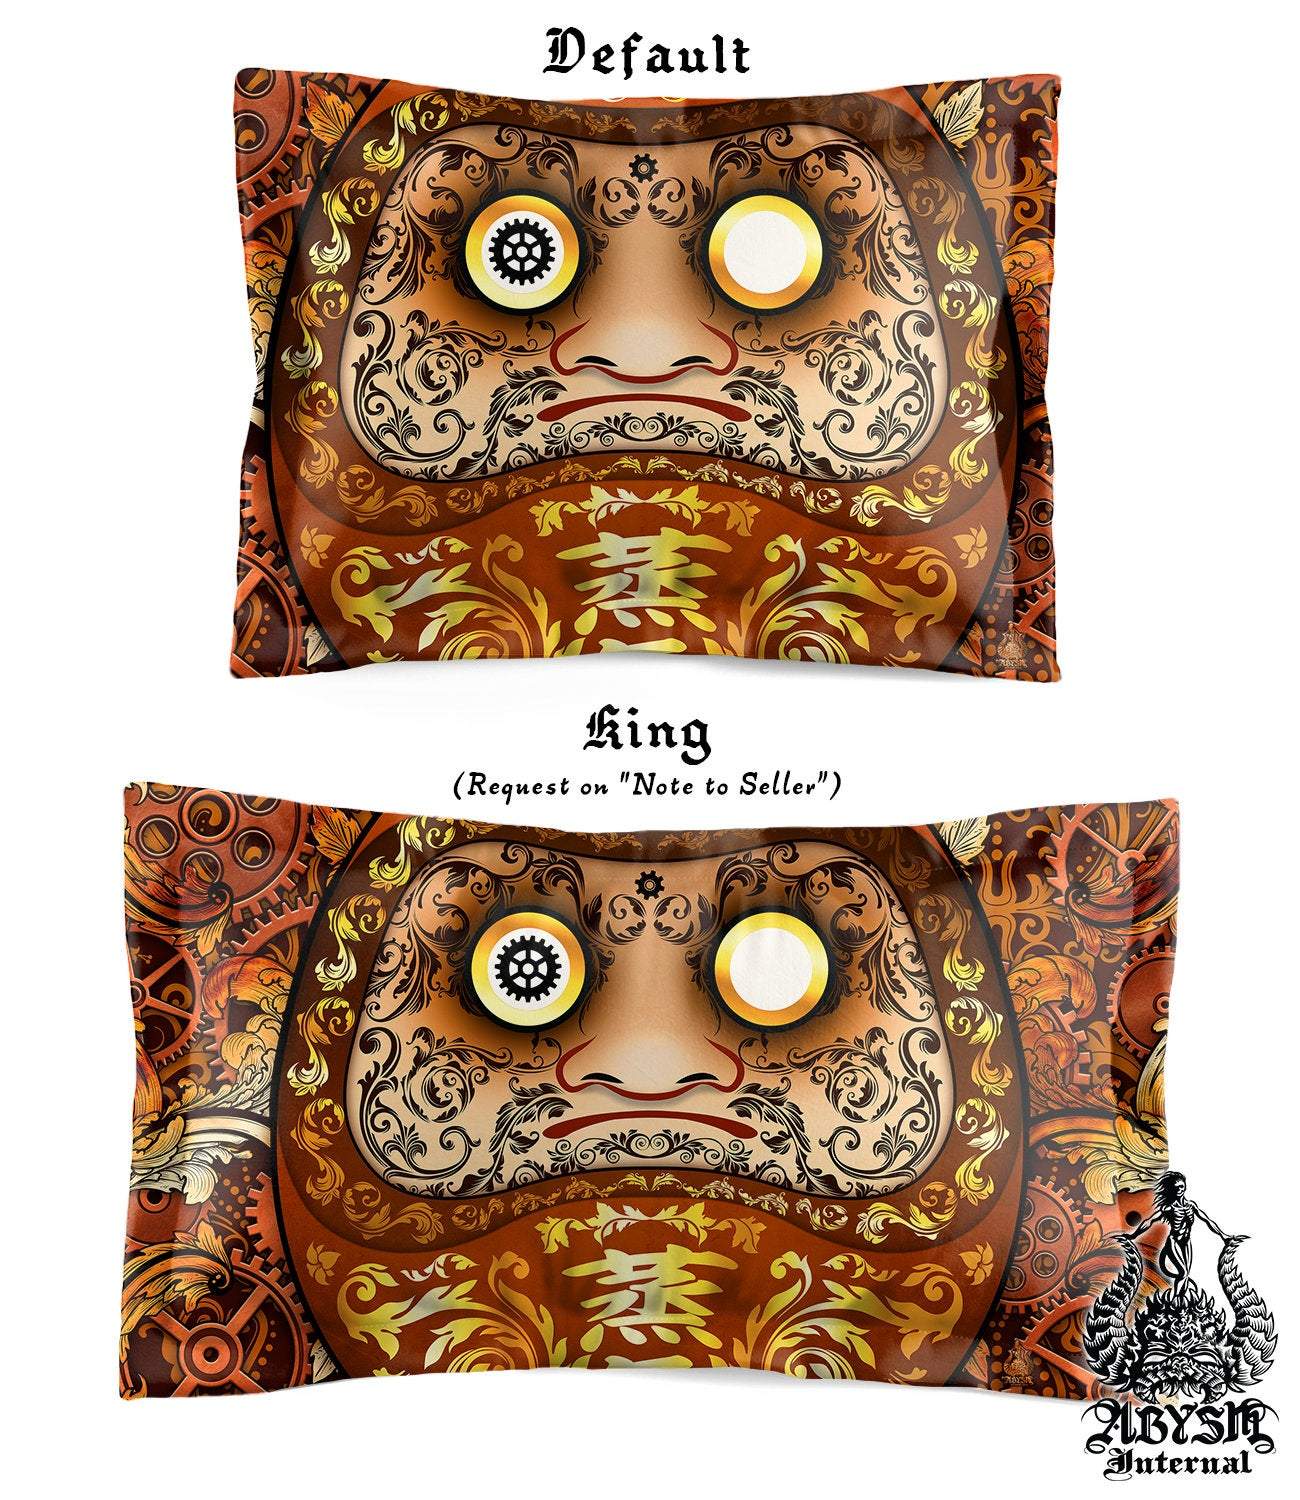 Daruma Bedding Set, Comforter and Duvet, Funny Bed Cover and Bedroom Decor, King, Queen and Twin Size - Steampunk - Abysm Internal